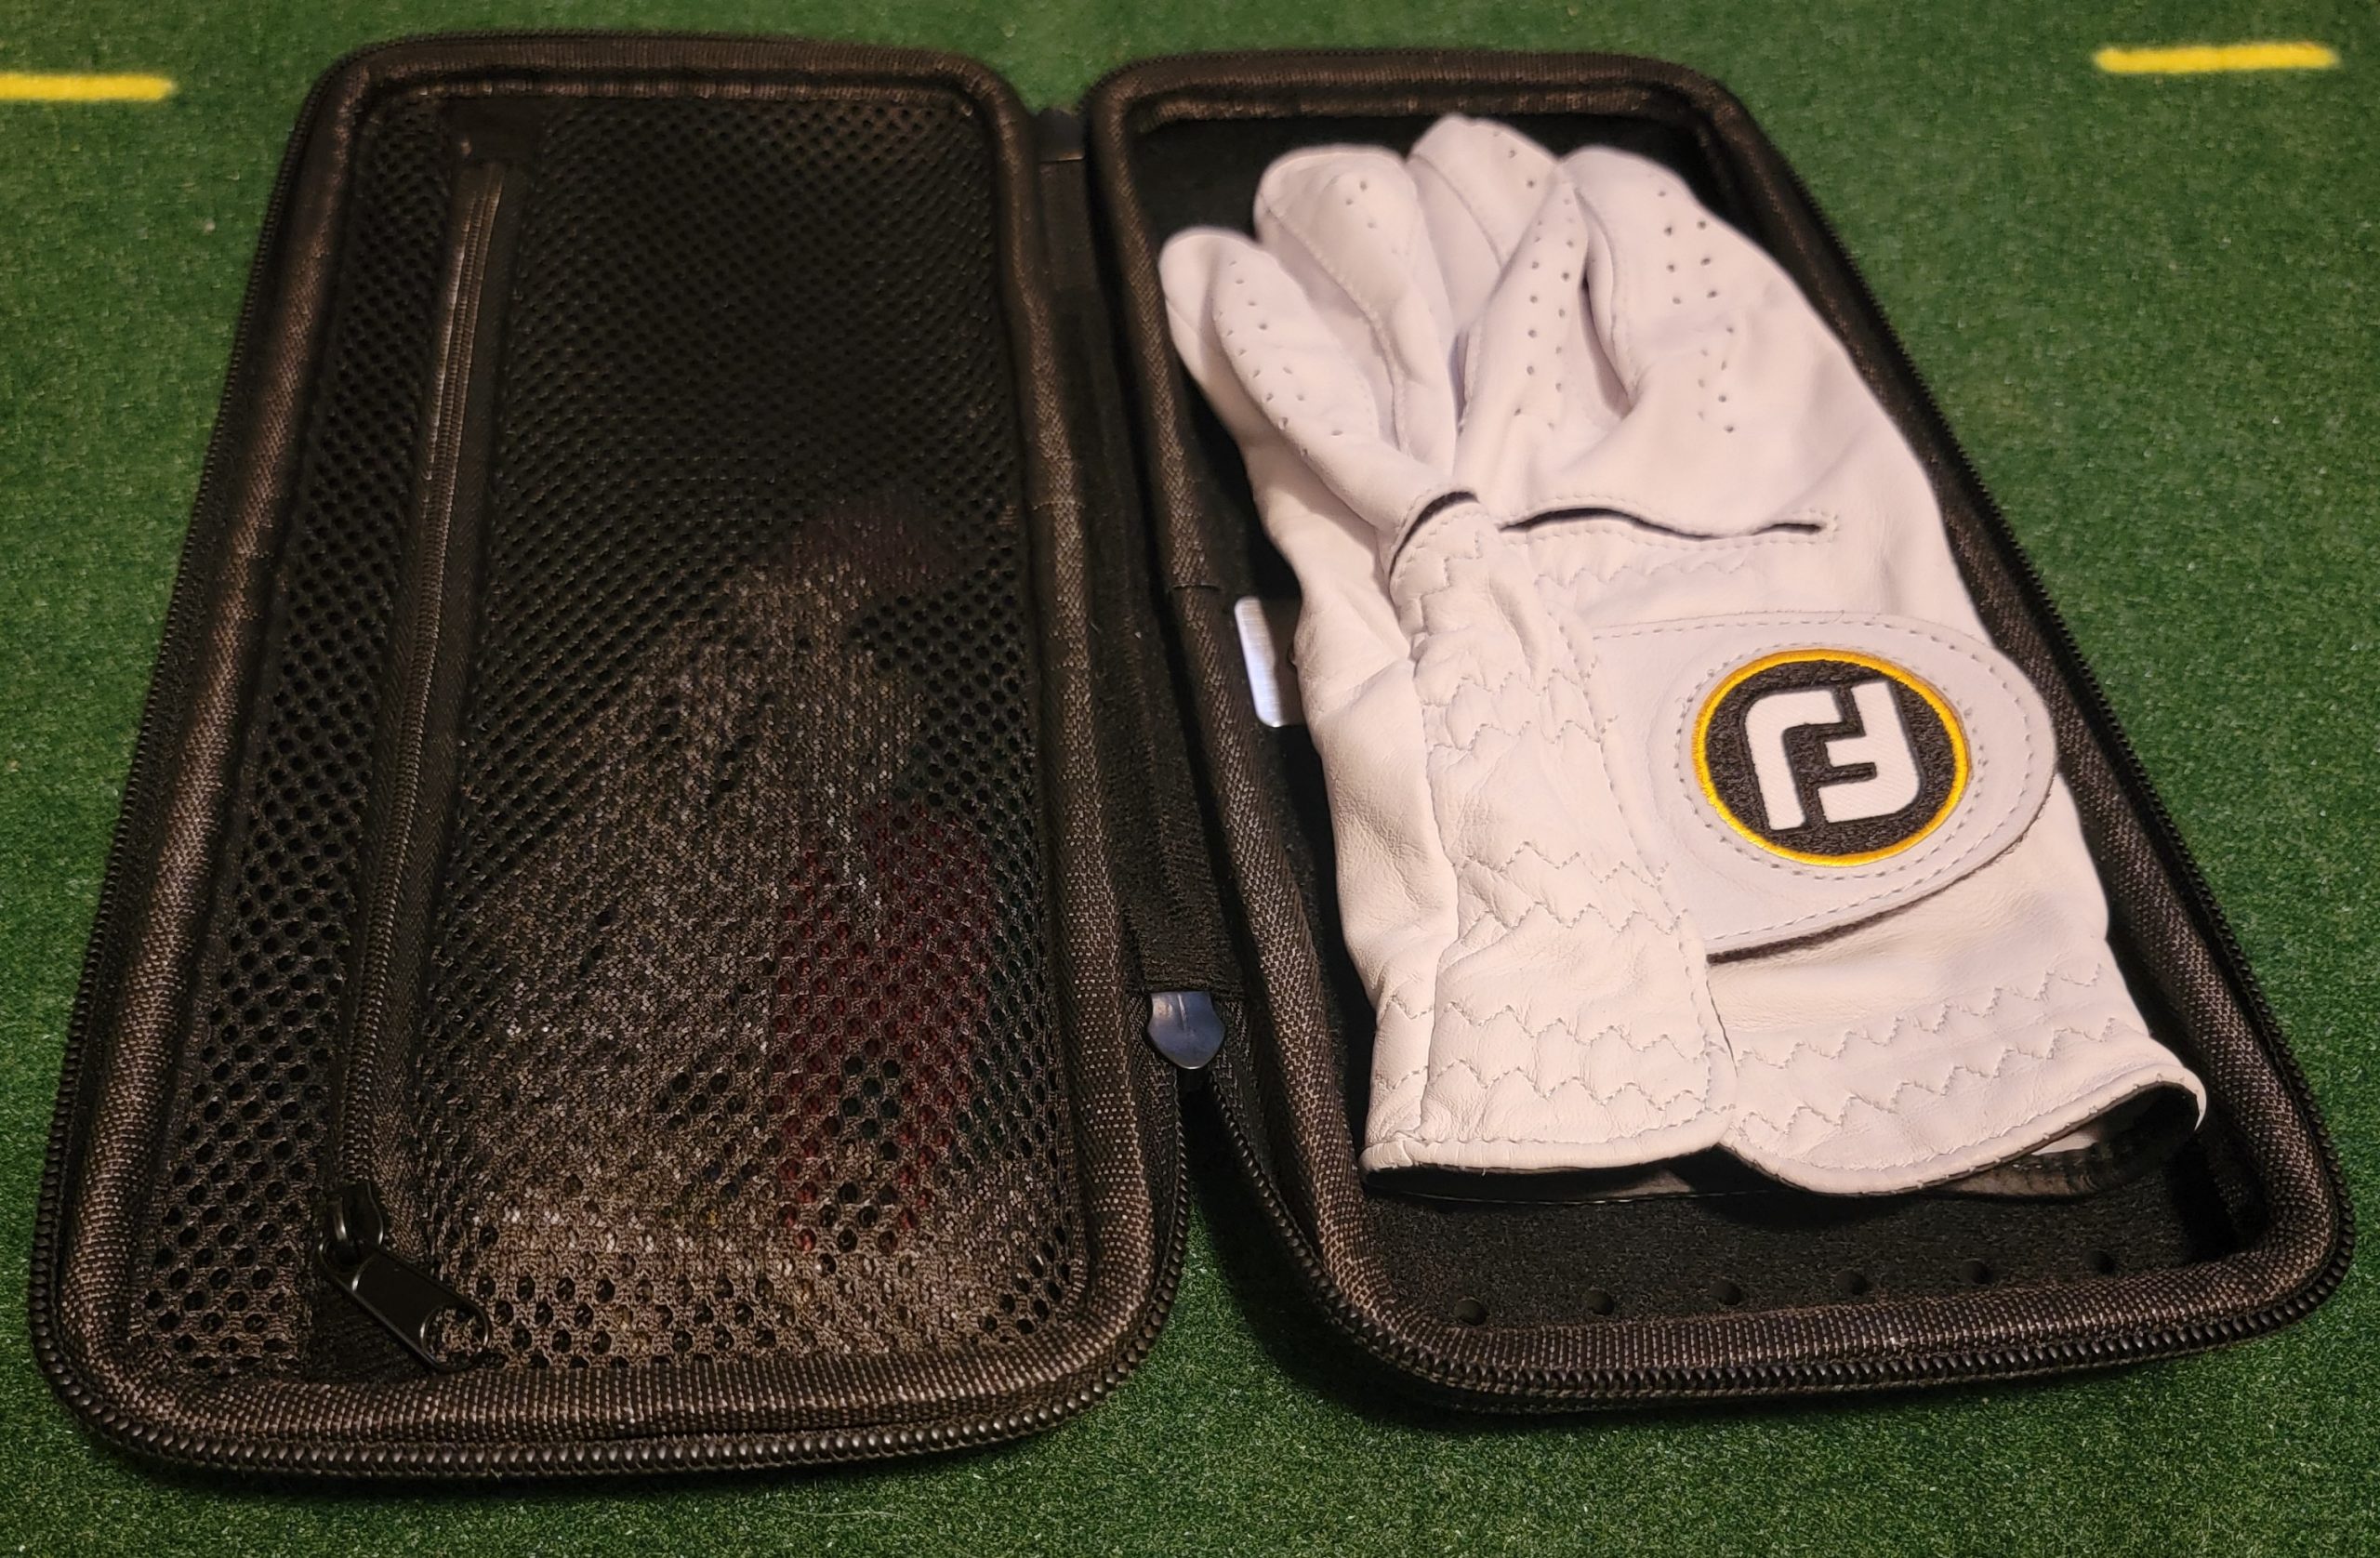 Old Duffer Golf image of a golf case open